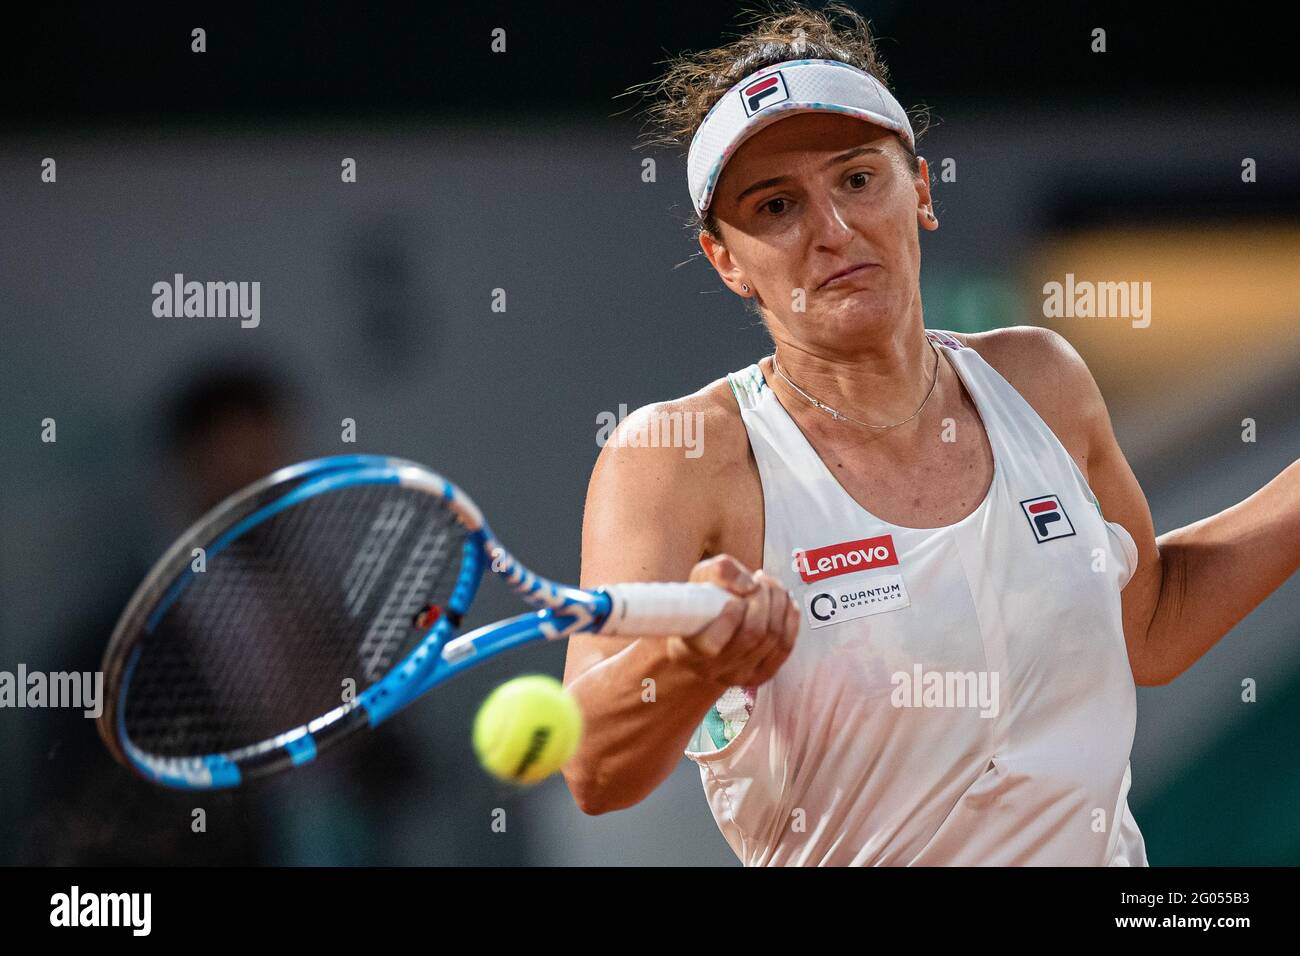 Paris, France. 31st May, 2021. Irina-Camelia Begu of Romania returns the ball during the women's first round match against Serena Williams of the United States at the French Open tennis tournament at Roland Garros in Paris, France, May 31, 2021. Credit: Aurelien Morissard/Xinhua/Alamy Live News Stock Photo